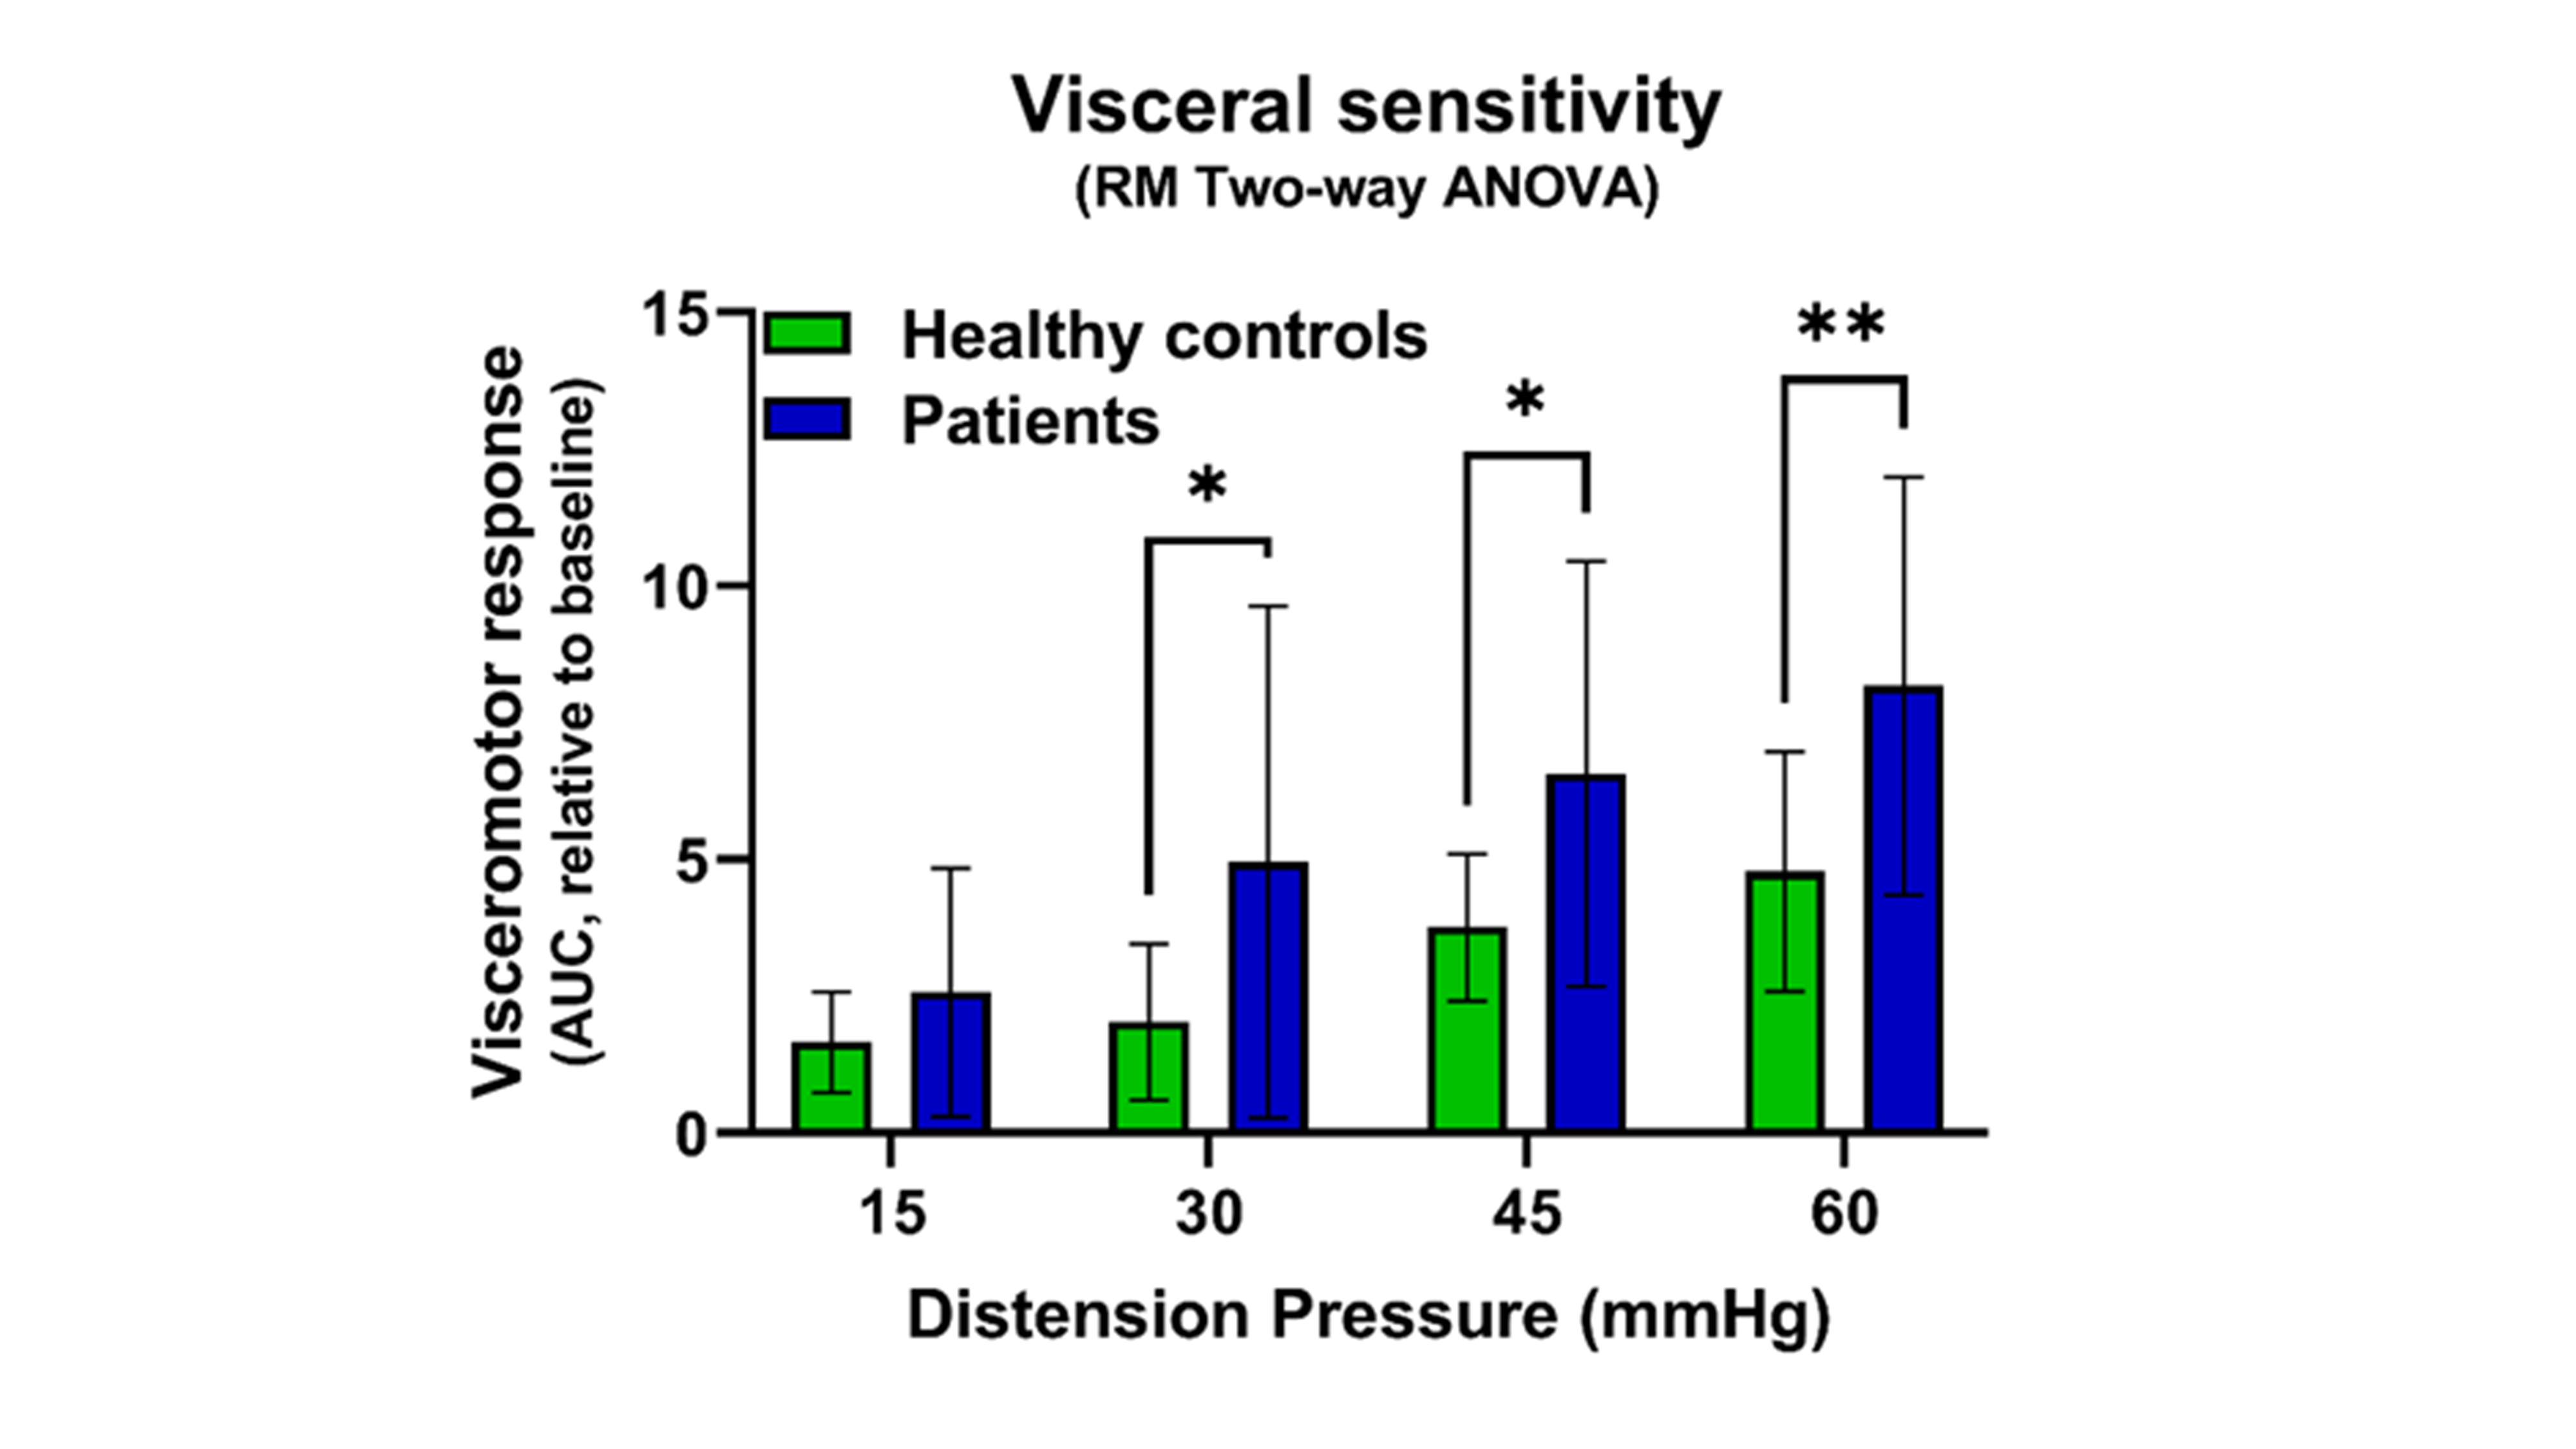 <b>Figure 2.</b> SI dysbiosis induces visceral hypersensitivity. The visceromotor response of mice, gavaged with SI aspirates from patients with abdominal pain, was increased at distension pressures of 30, 45 and 60 mmHg when compared to mice, gavaged with SI aspirates from healthy controls. Repeated measurements Two-Way ANOVA with Bonferroni post-hoc correction to account for multiple mice colonized with the same donor sample: *p<0.05, **p<0.01.